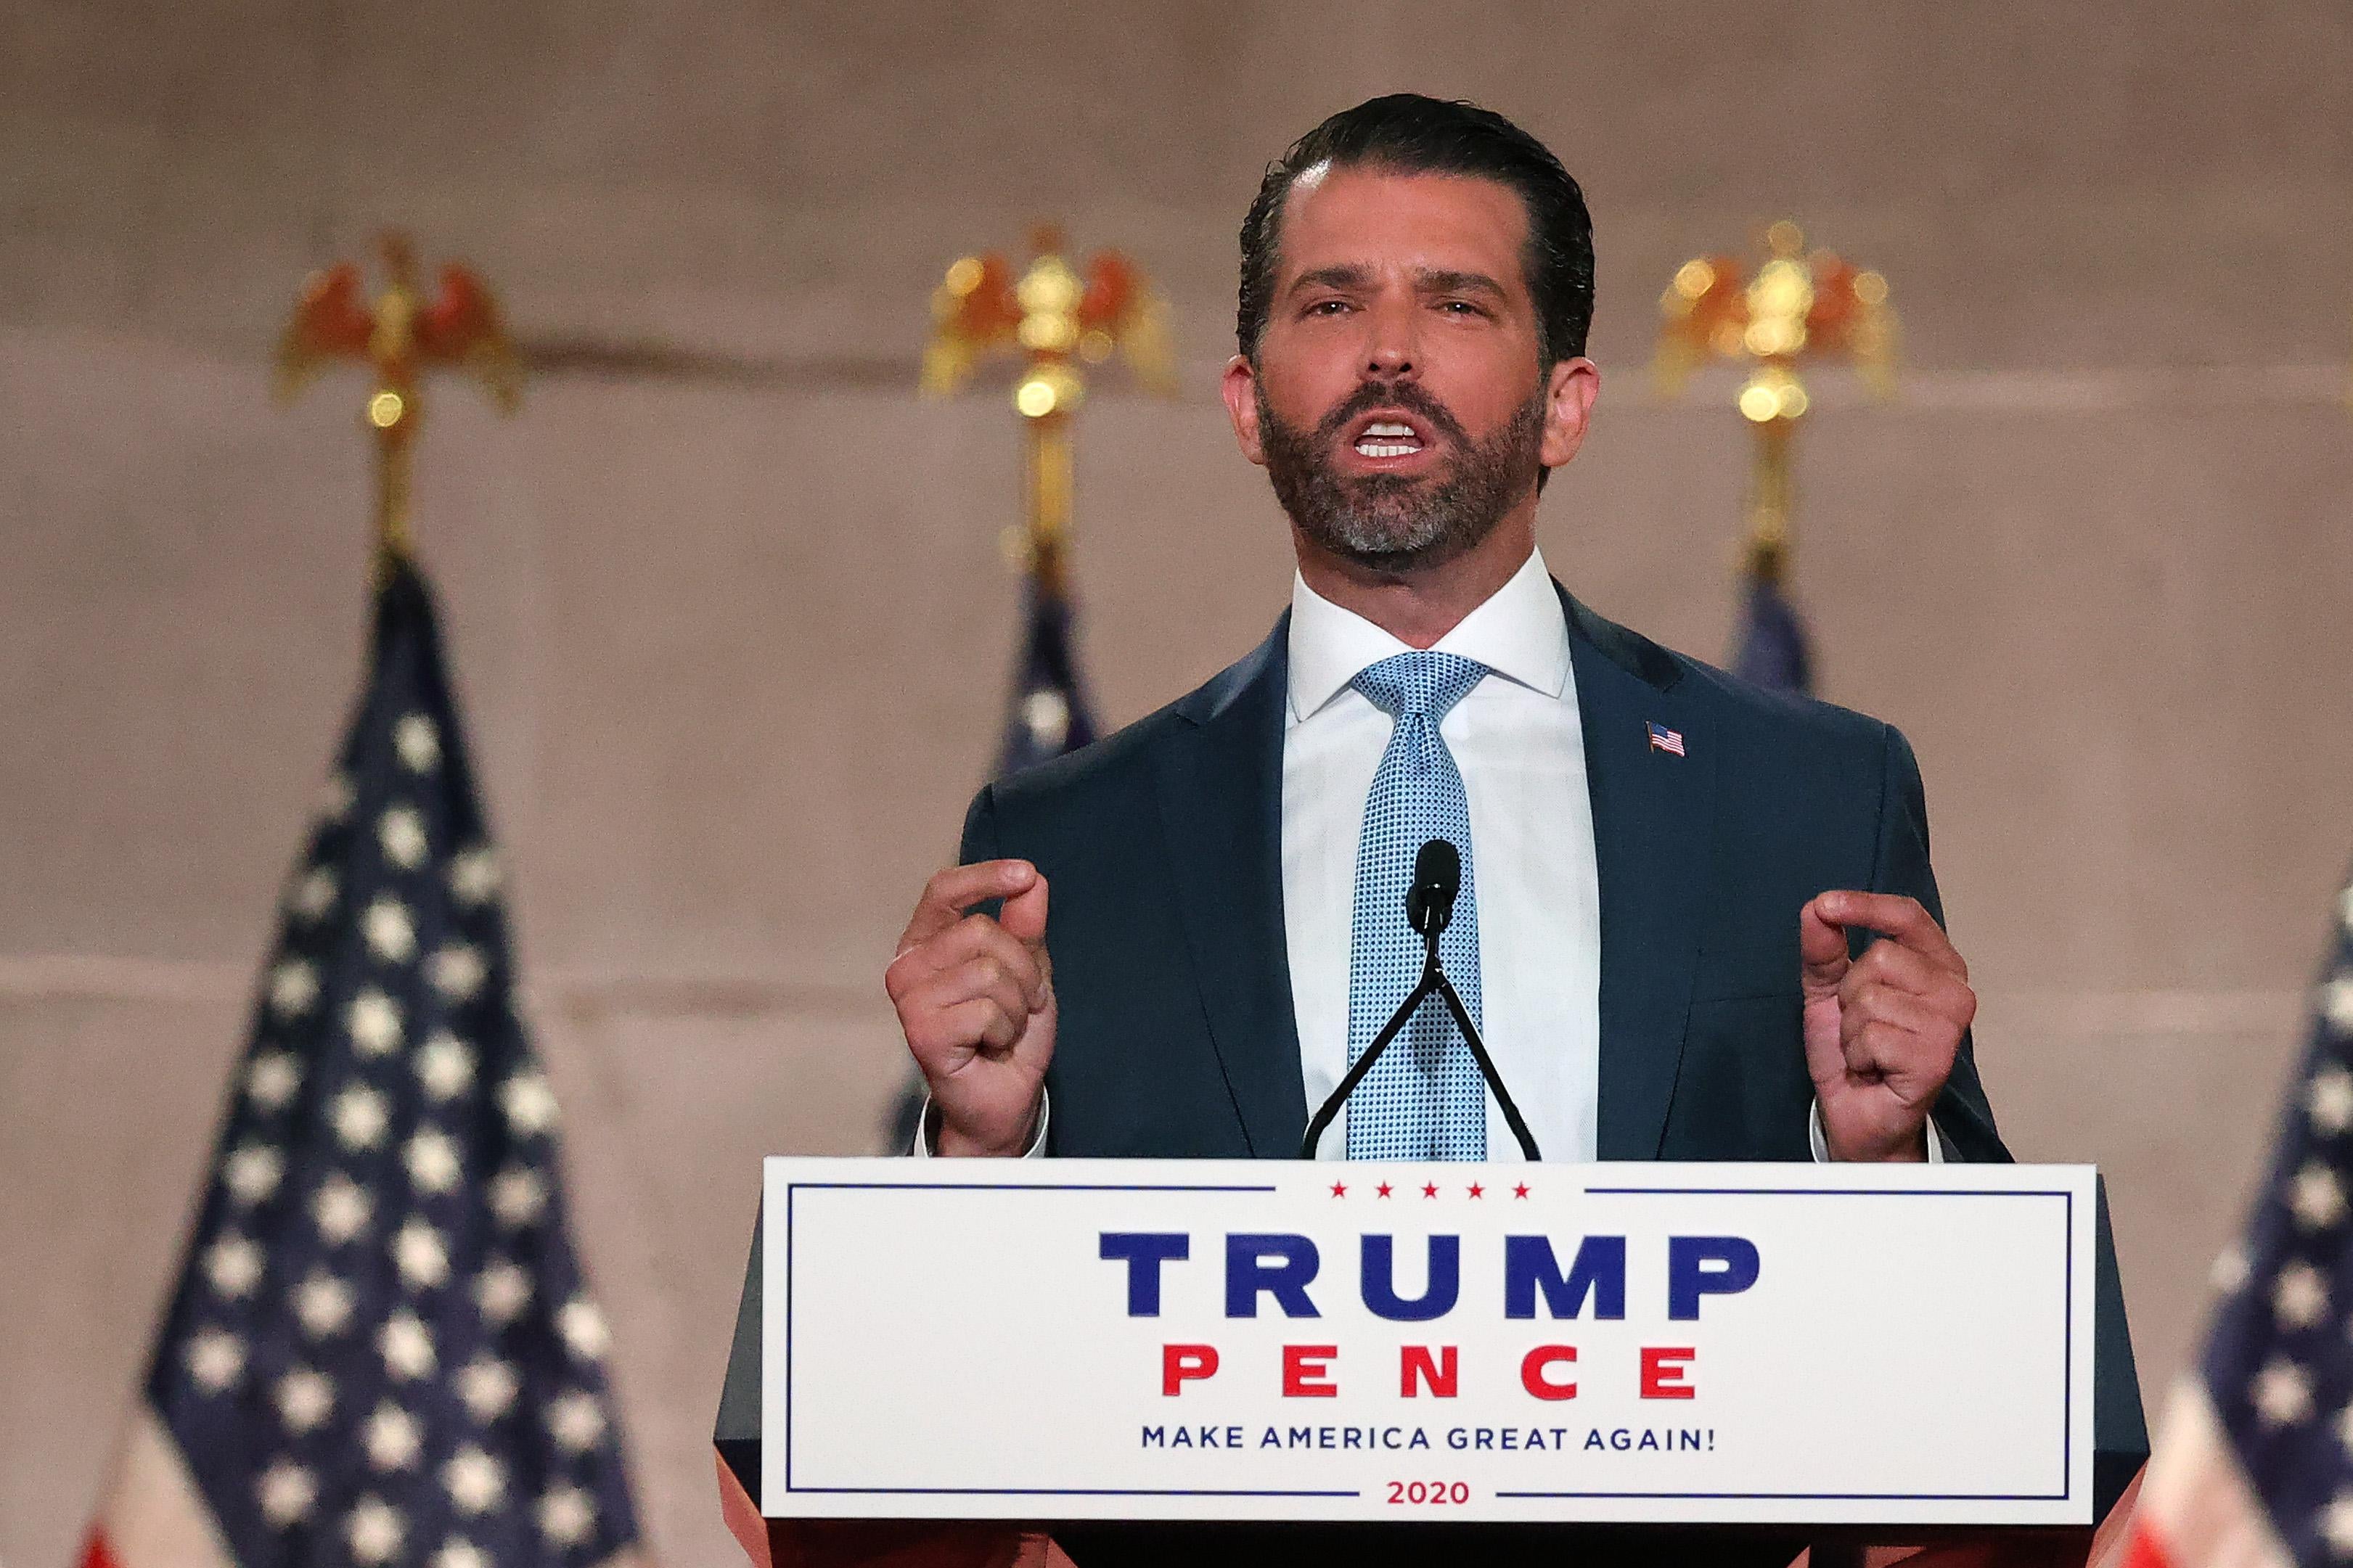 Donald Trump Jr. stands behind a podium with a "Trump Pence" sign on it. He gestures with both hands, touching his pointer fingers and thumbs together. Several U.S. flags stand on poles behind him.